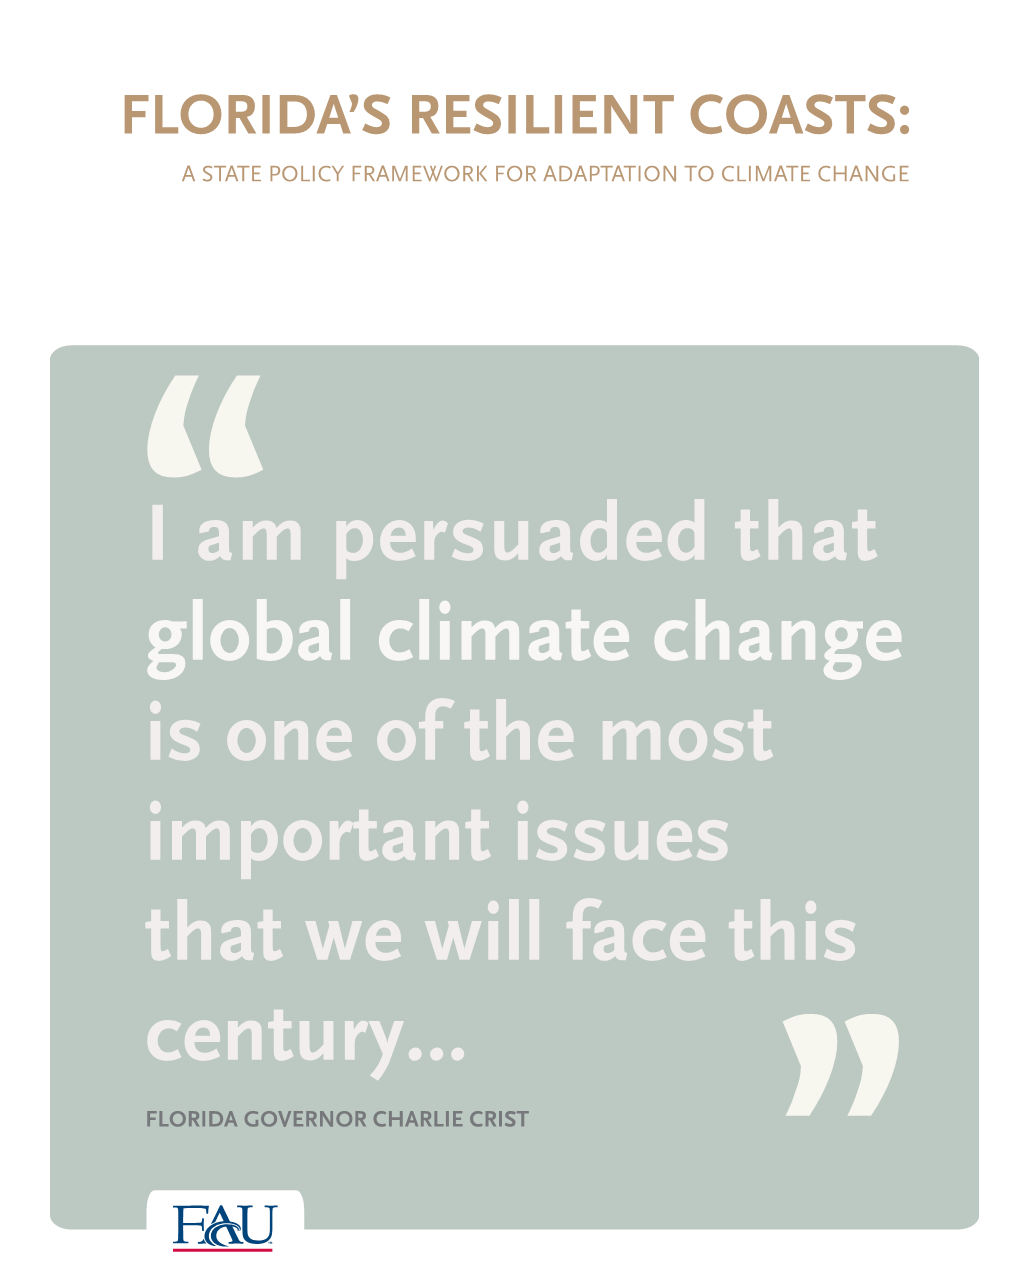 I Am Persuaded That Global Climate Change Is One of the Most Important Issues That We Will Face This Century…